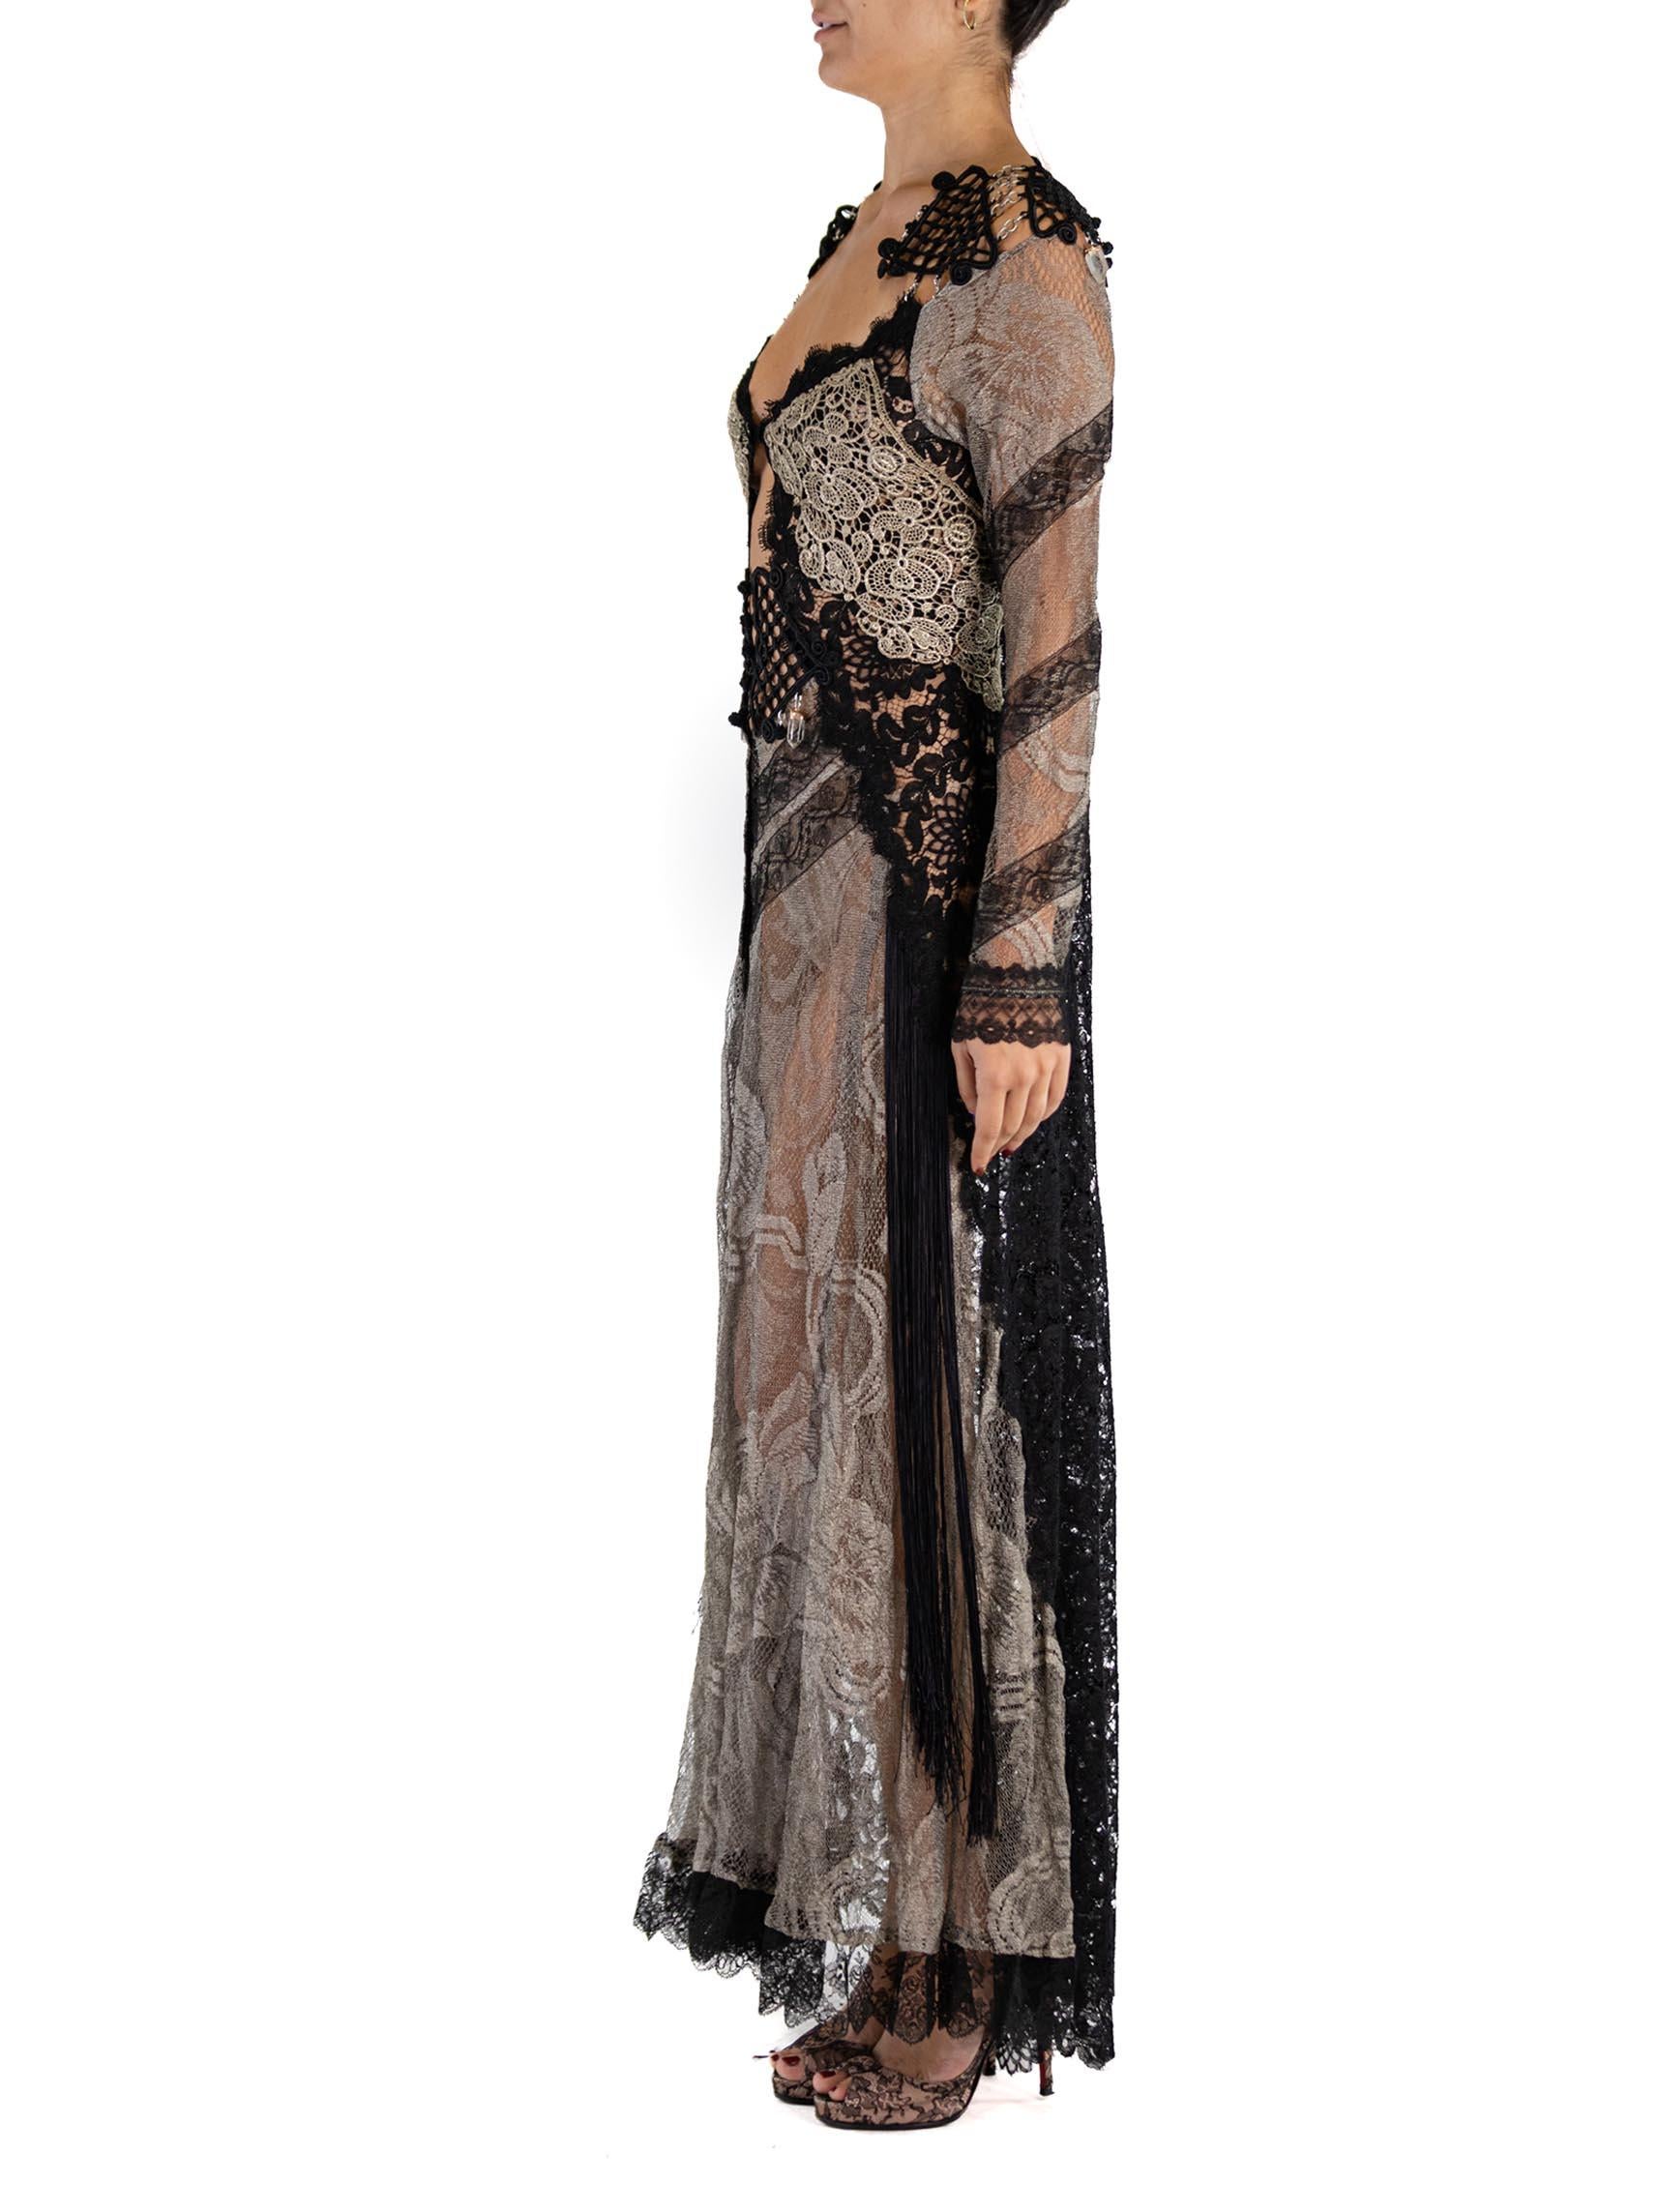 This gown is made from antique 1920s metallic lace woven with real silver. With Victorian hand made passementerie at the shoulders, linked together with chain links and finished off with a few dangling real quartz crystals. The sleeves and hem are